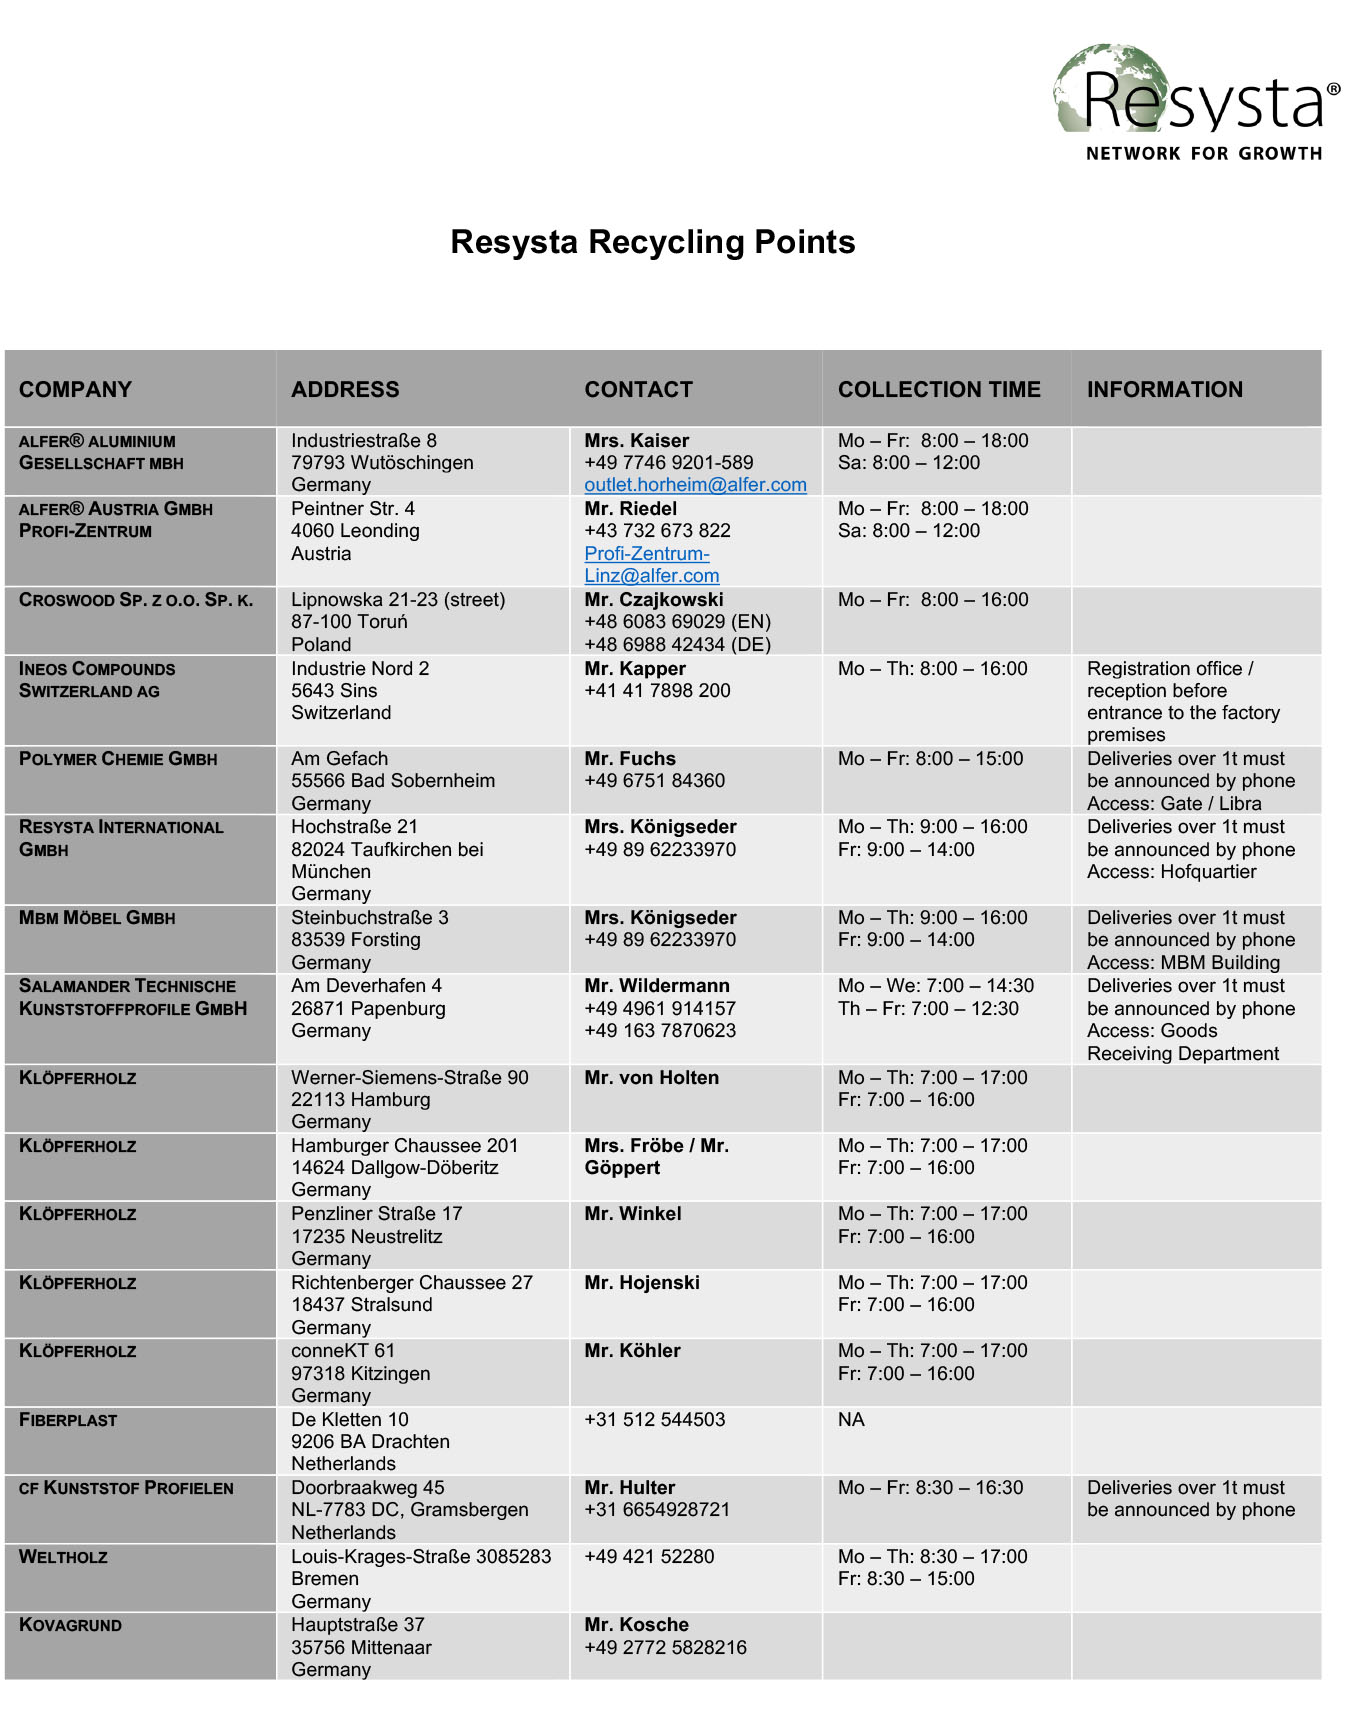 Resysta Recycling Points